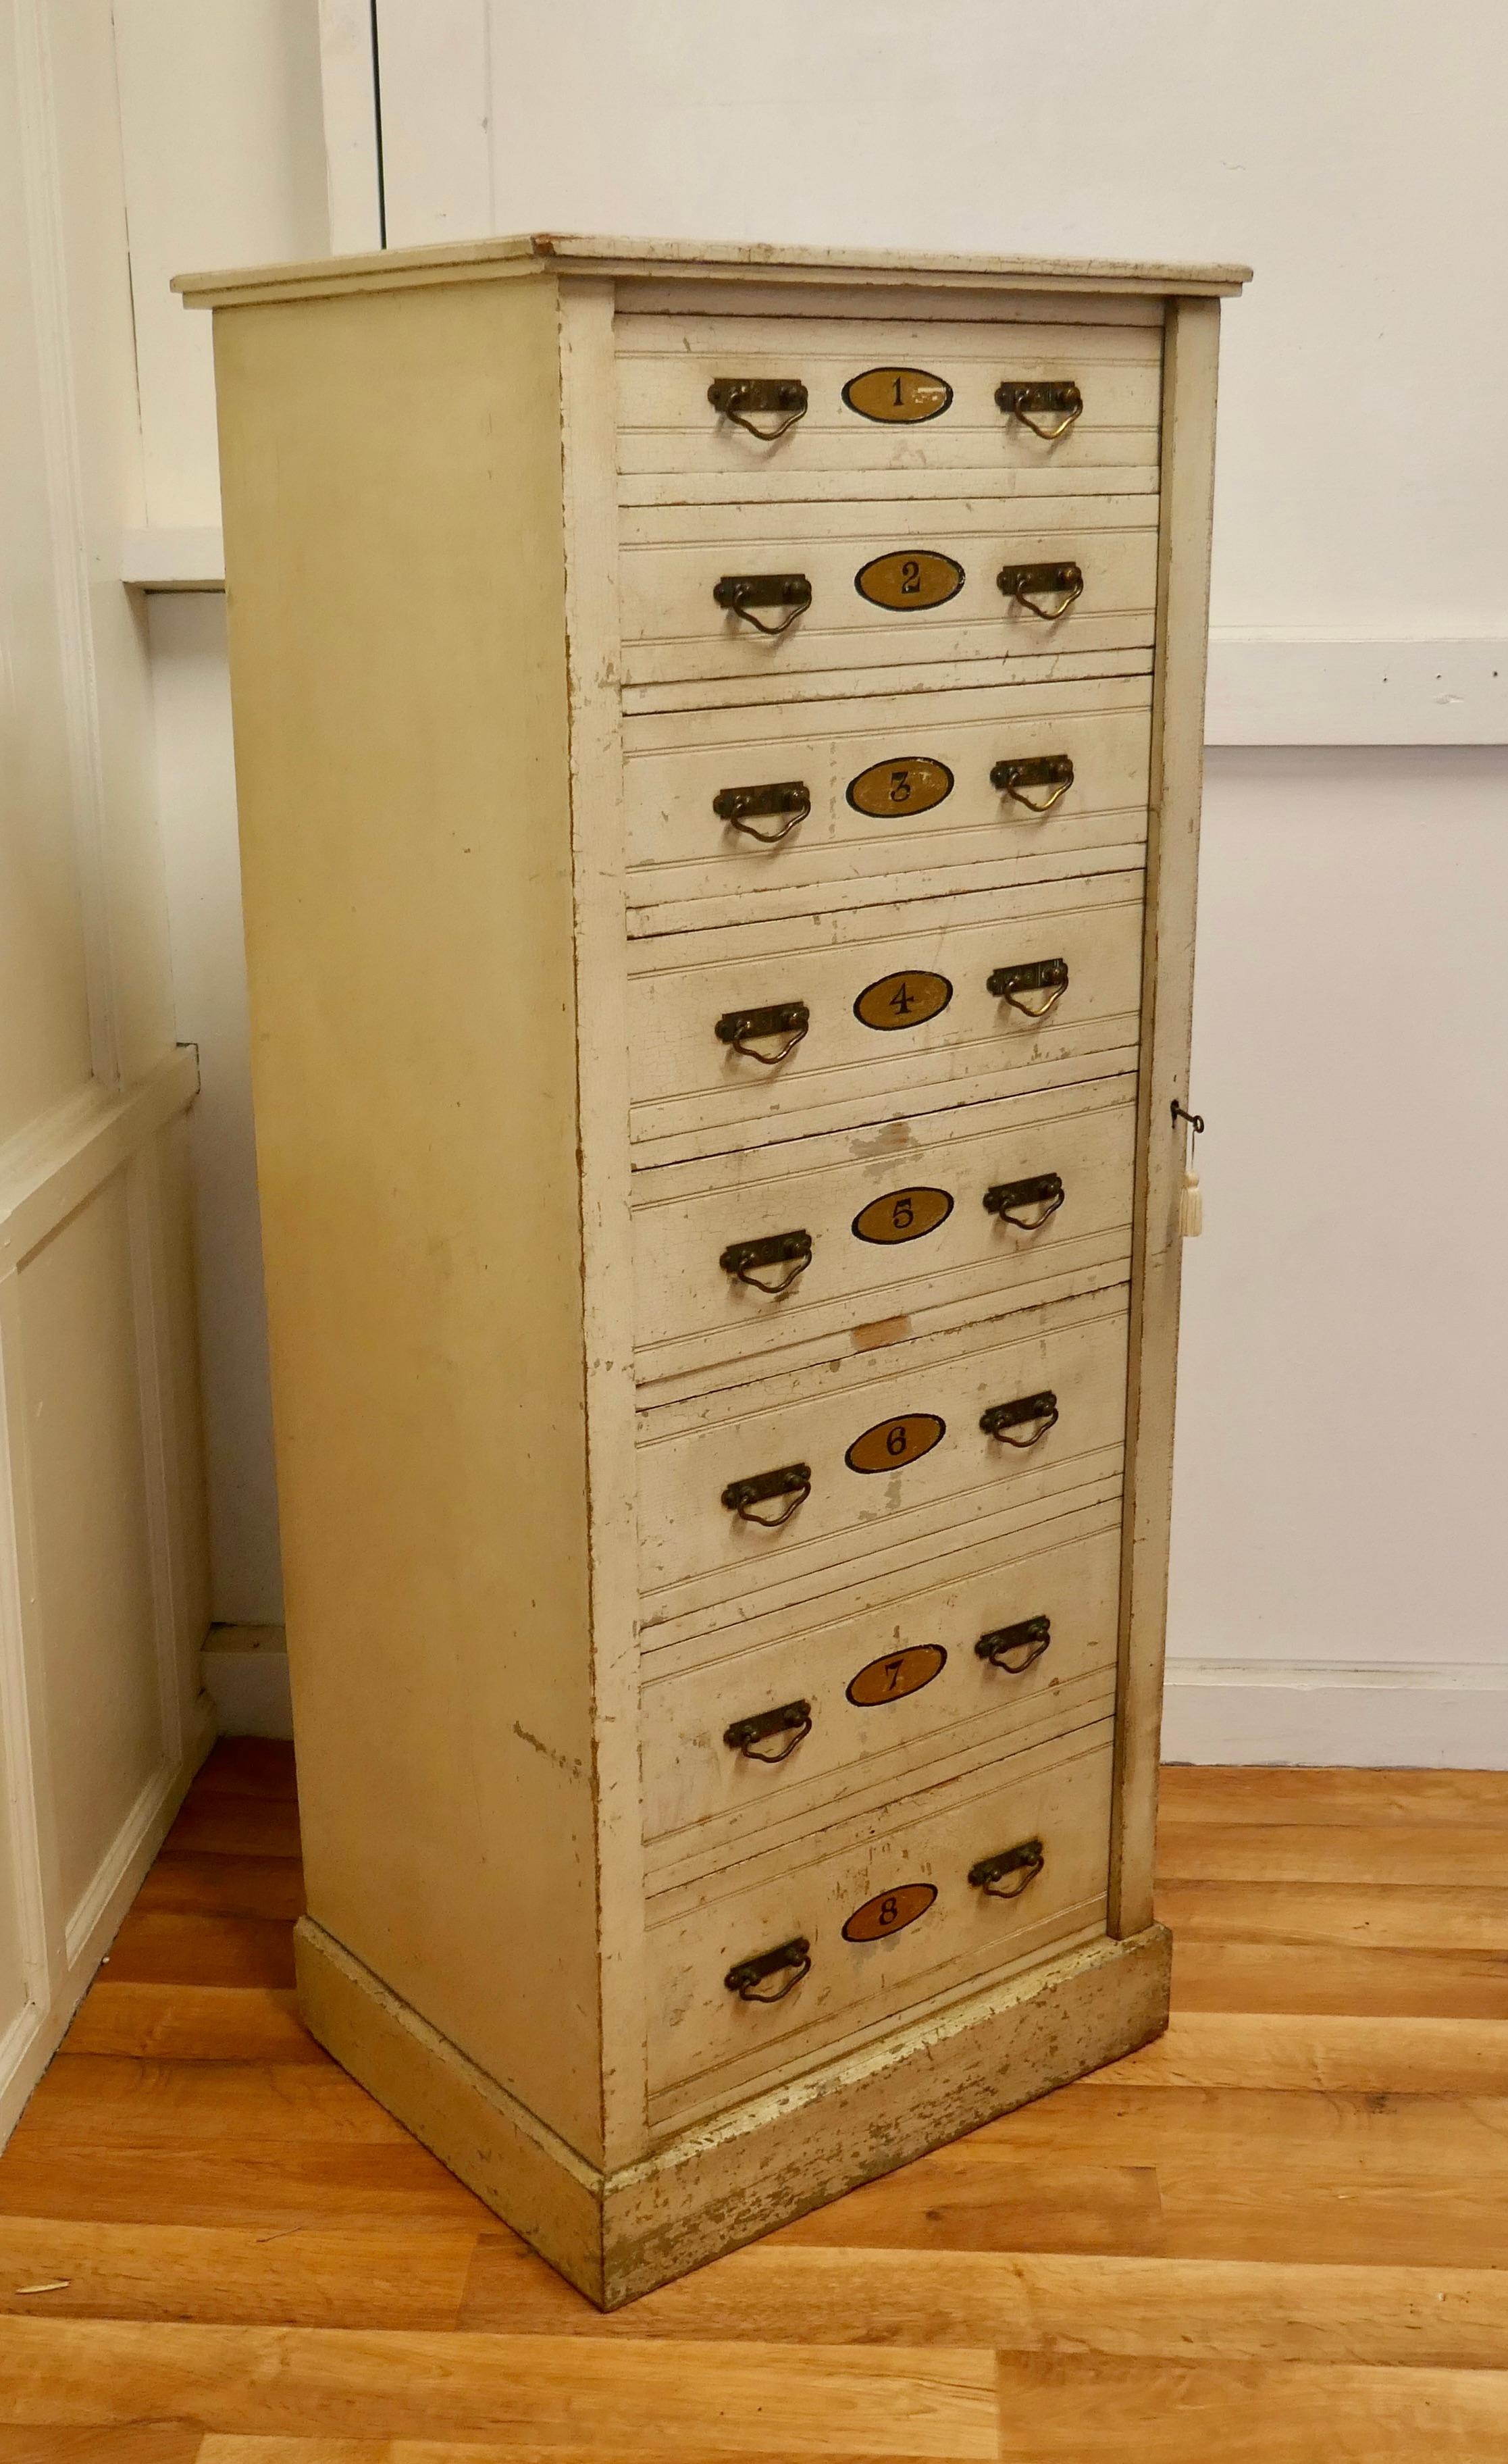 Tall Edwardian painted Wellington chest filing cabinet
 
The chest is full of character, it has an original painted finish, this is old with a crackle finish and the 8 drawers are all numbered on the front.
The cabinet is a heavy piece with a